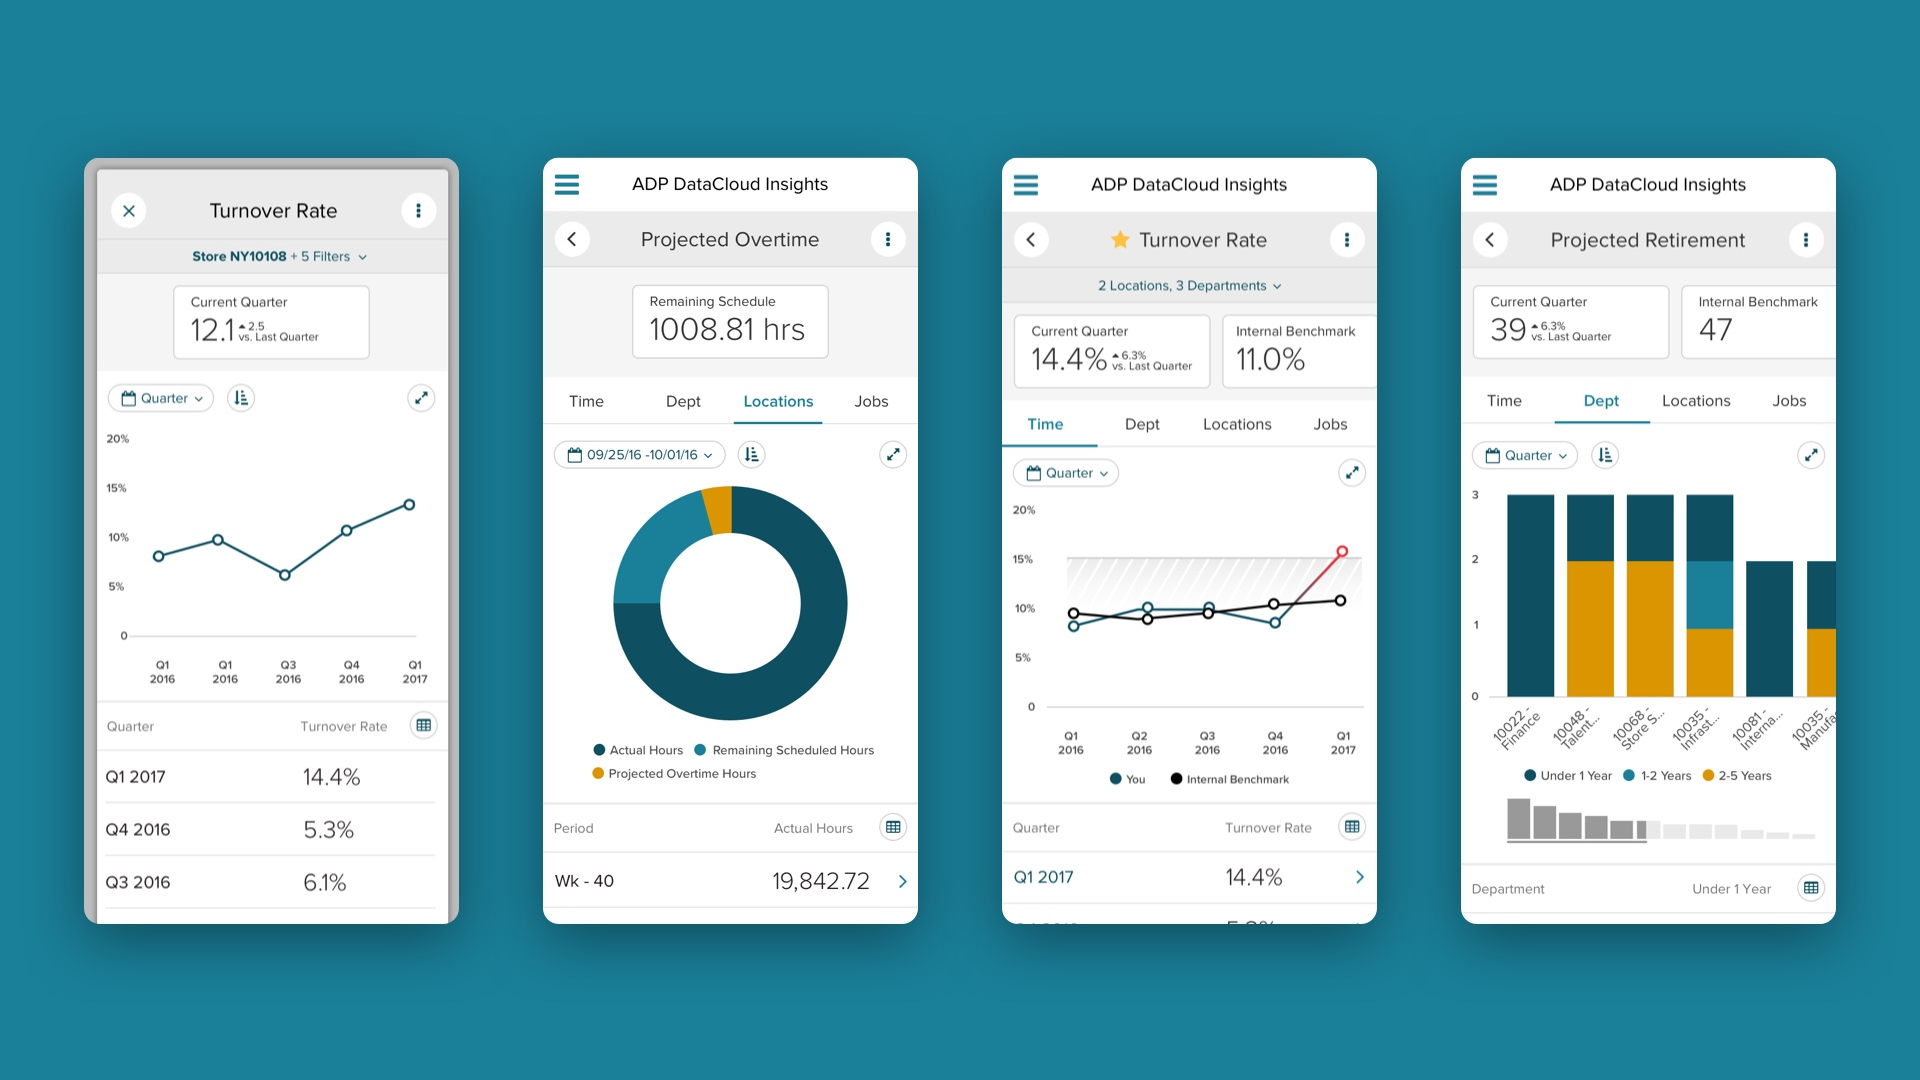 Mobile screens portraying HR data like turnover rate, projected overtime, and retirement